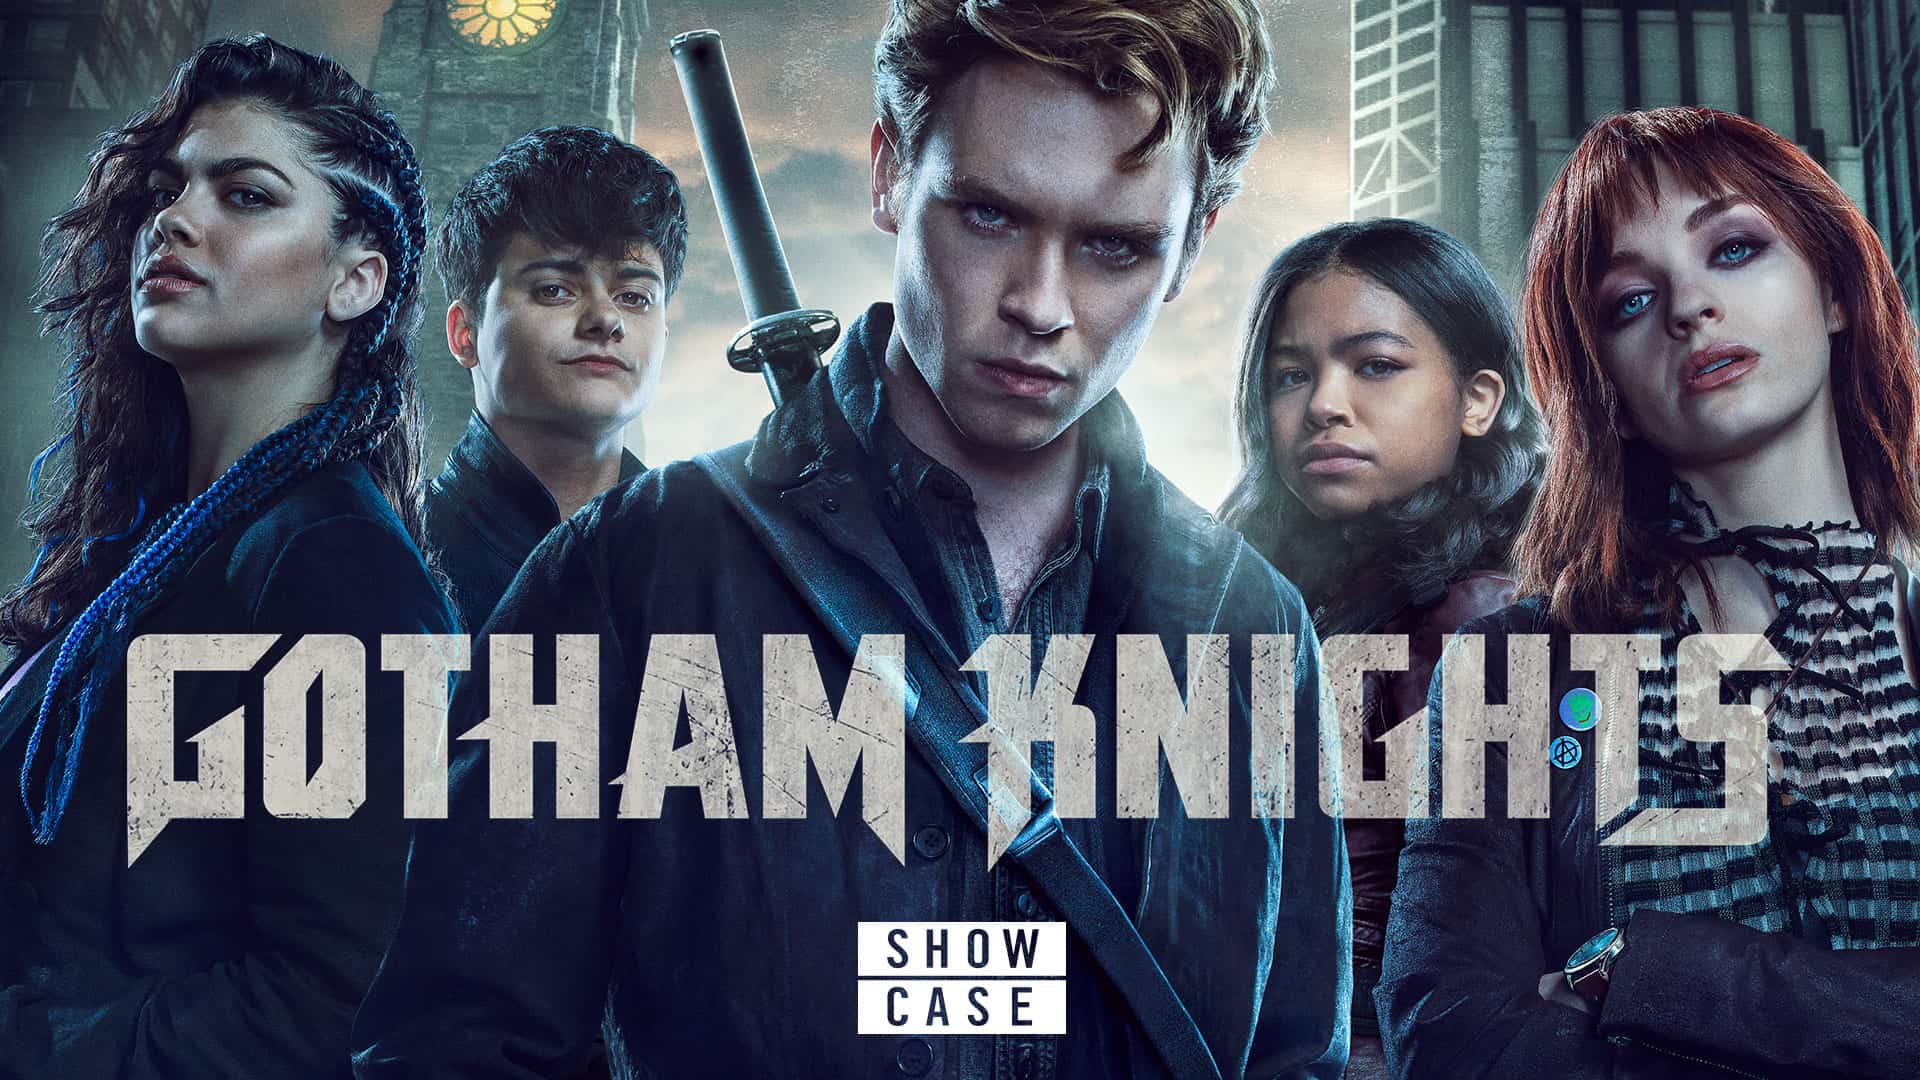 Gotham Knights Release Date: When is Gotham Knights coming out?